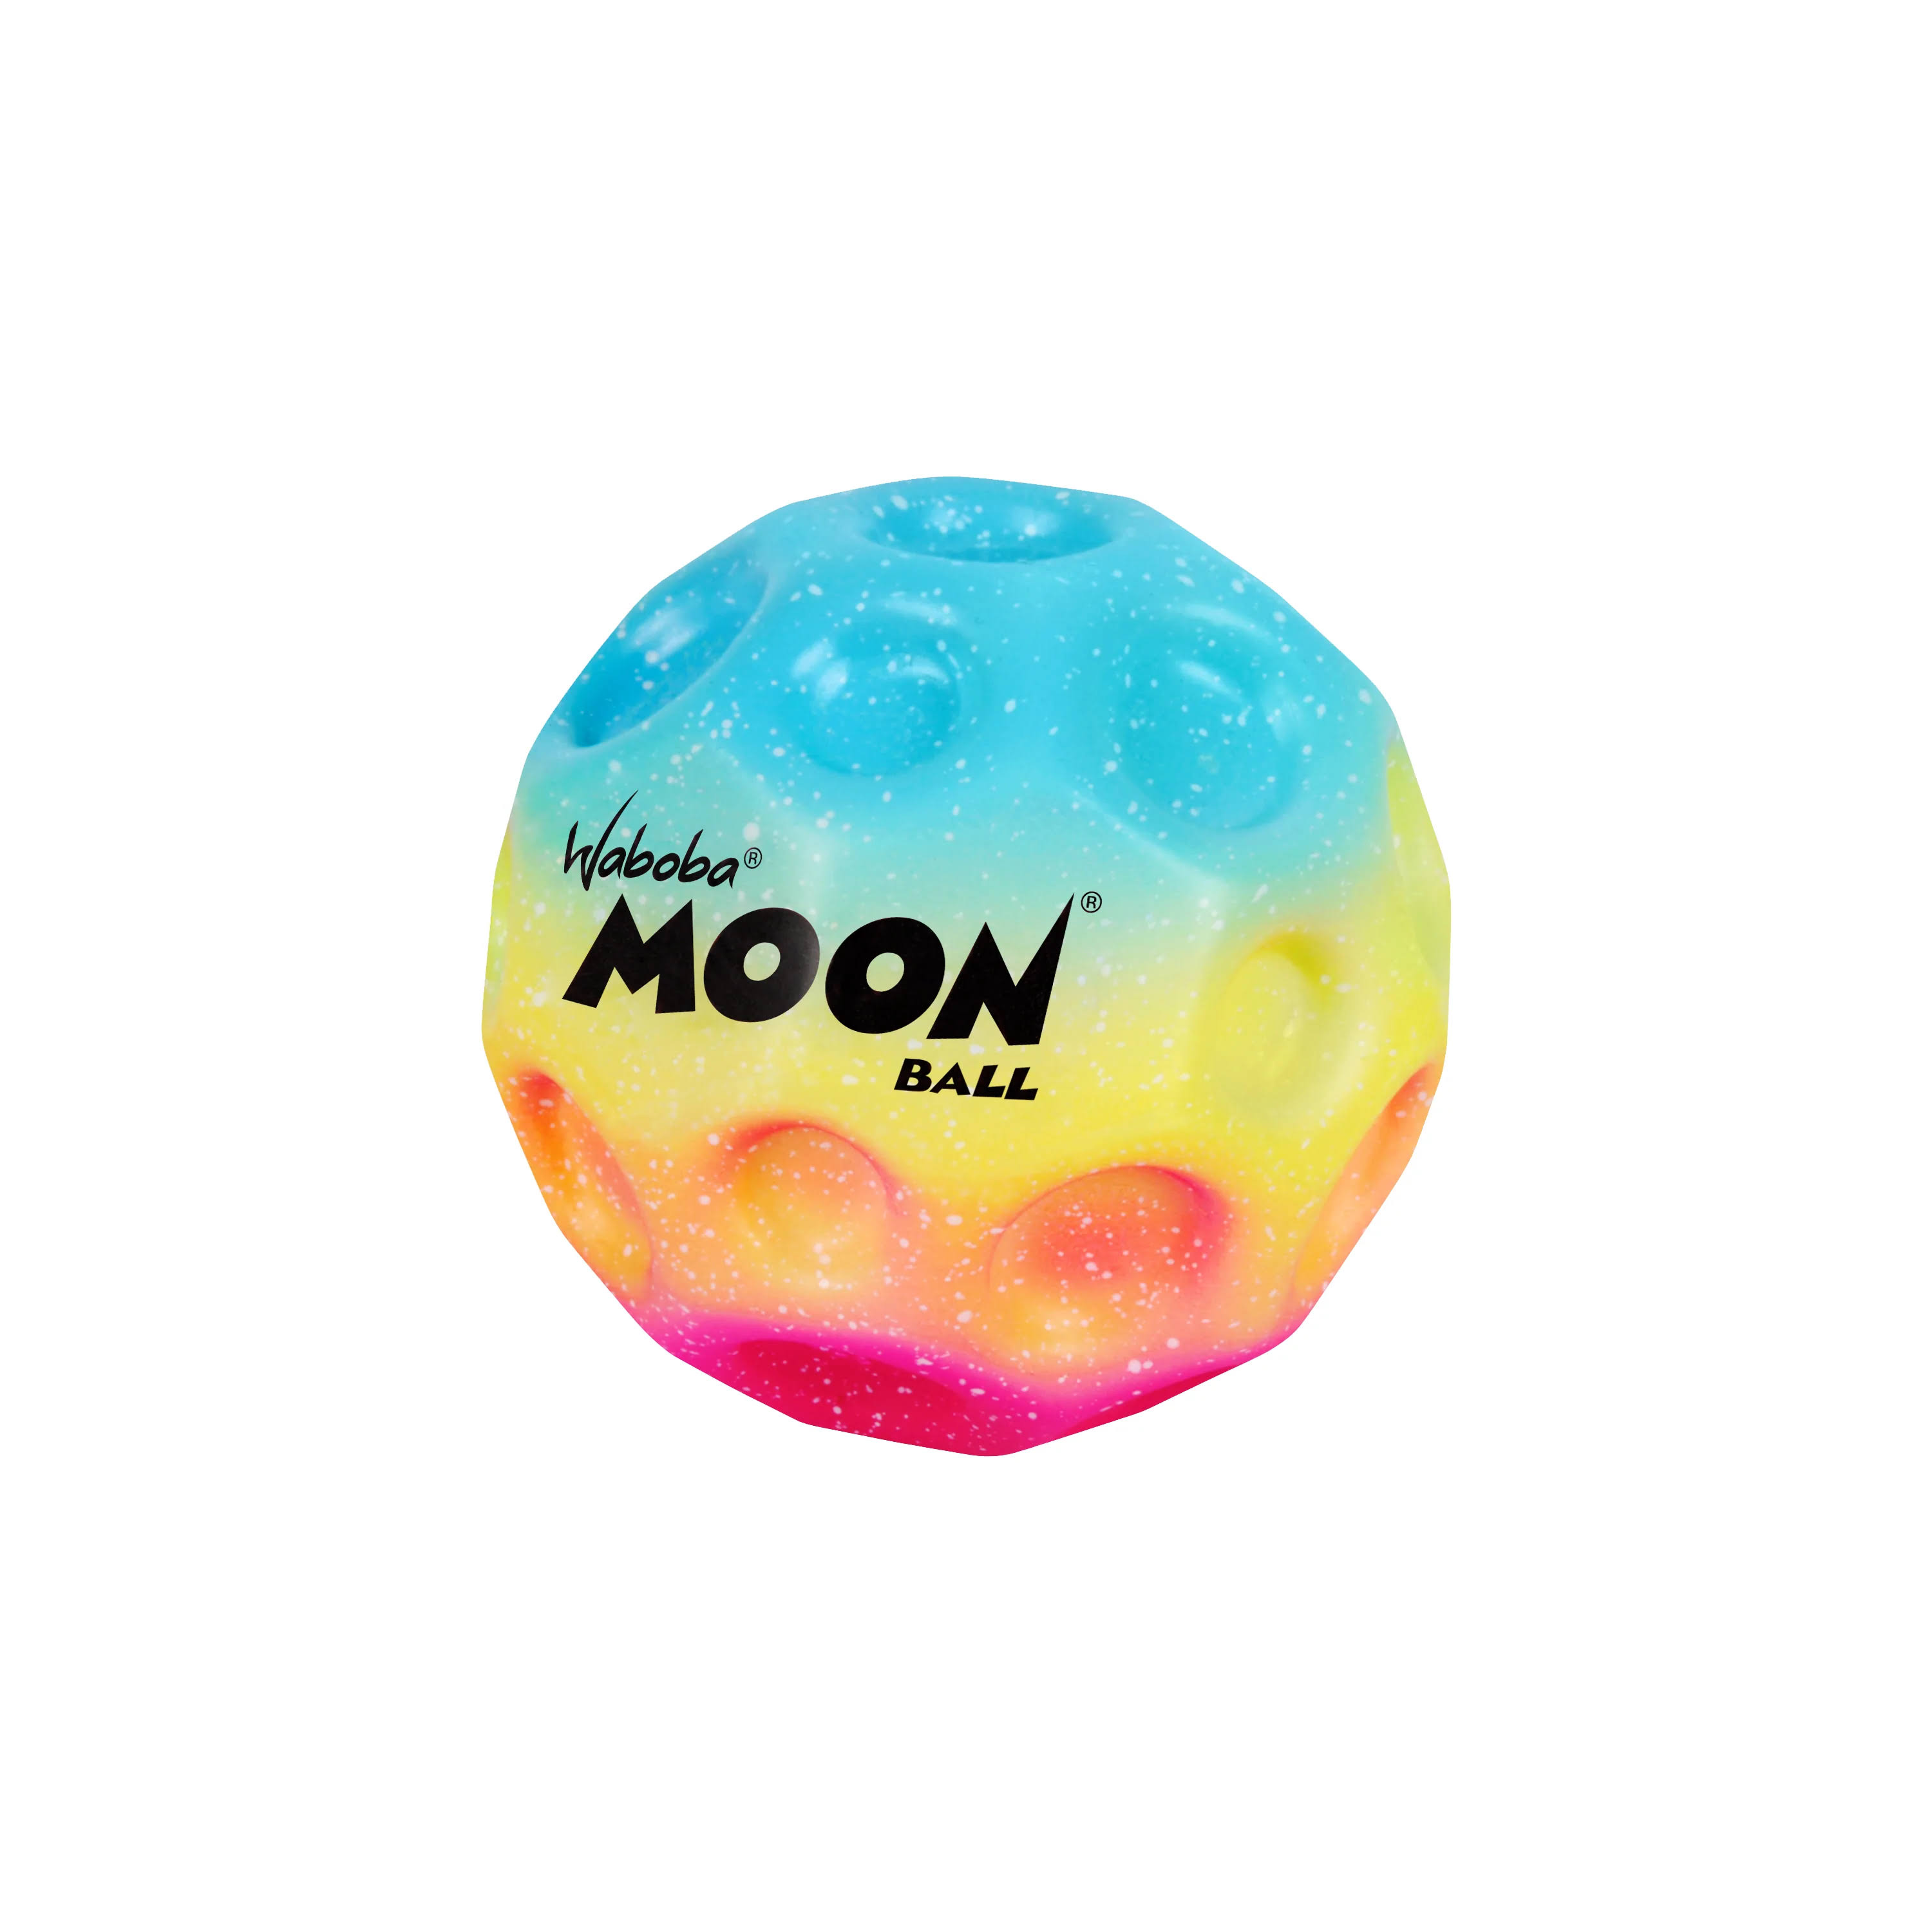 Waboba Gradient Moon Ball Bounces Out of This World Original Patented Design Craters Make Pop Sounds When It Hits The Ground Easy To Grip